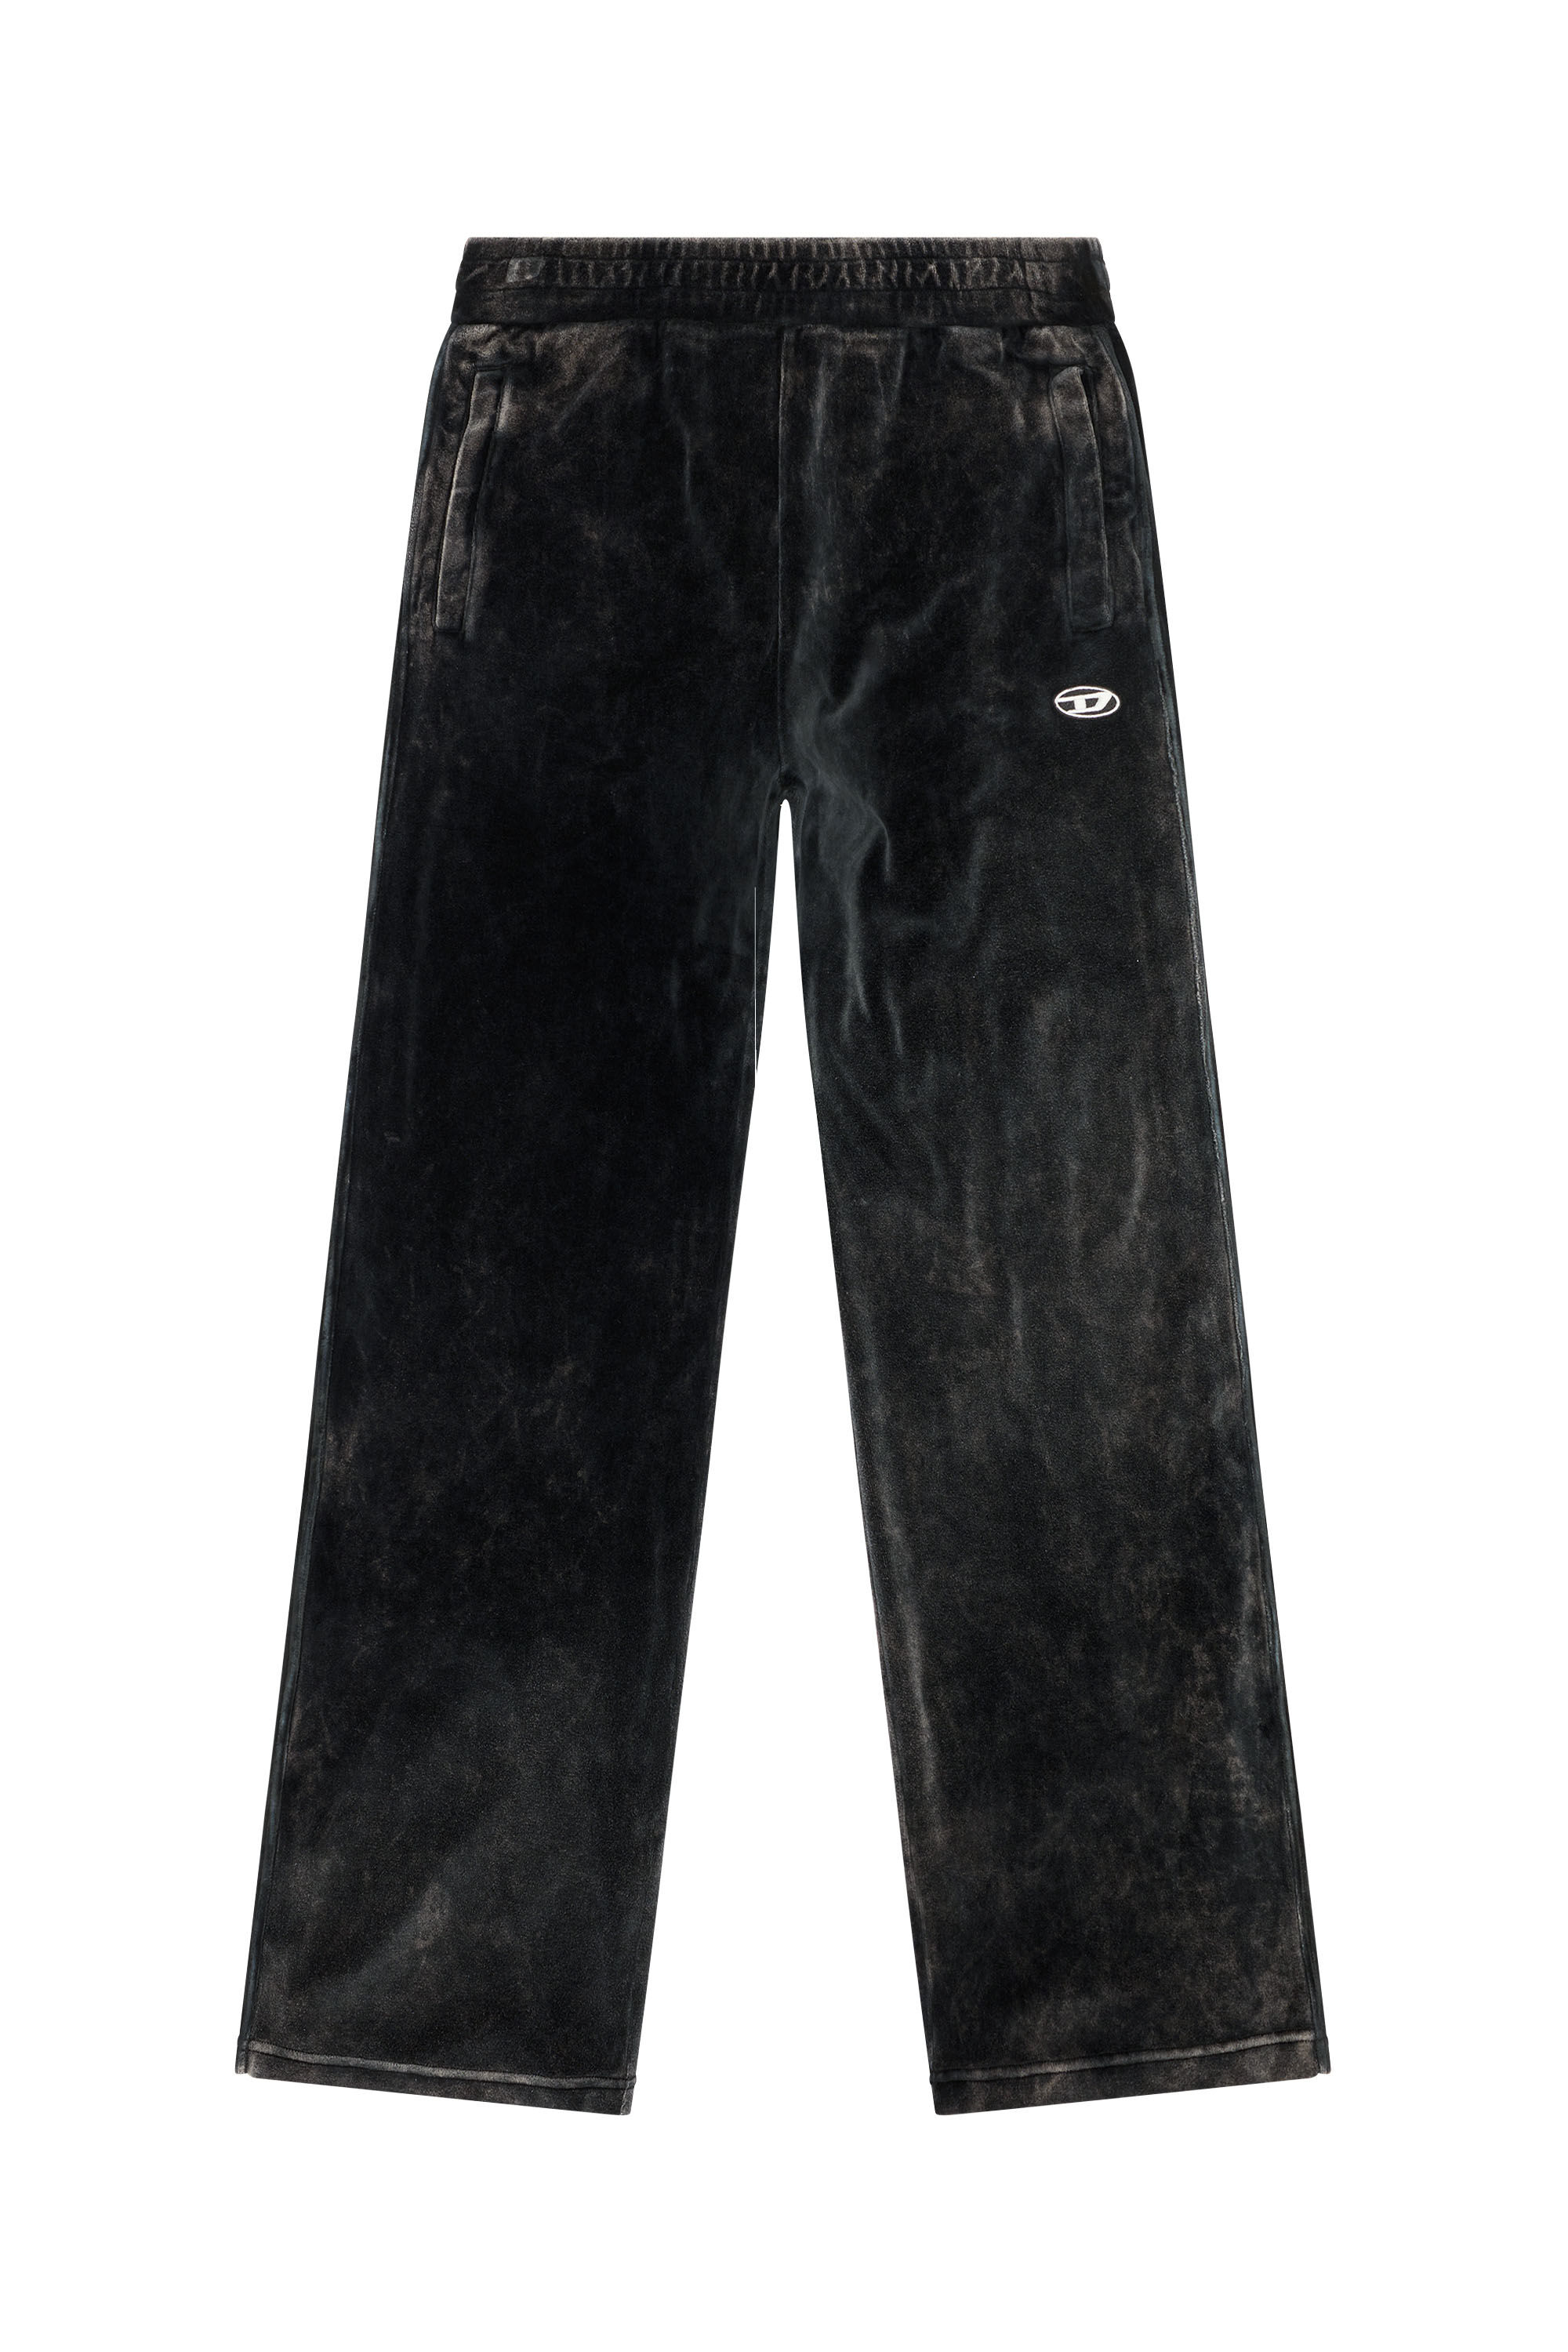 Men's Chenille track pants with side bands | P-ZAMPBAND Diesel